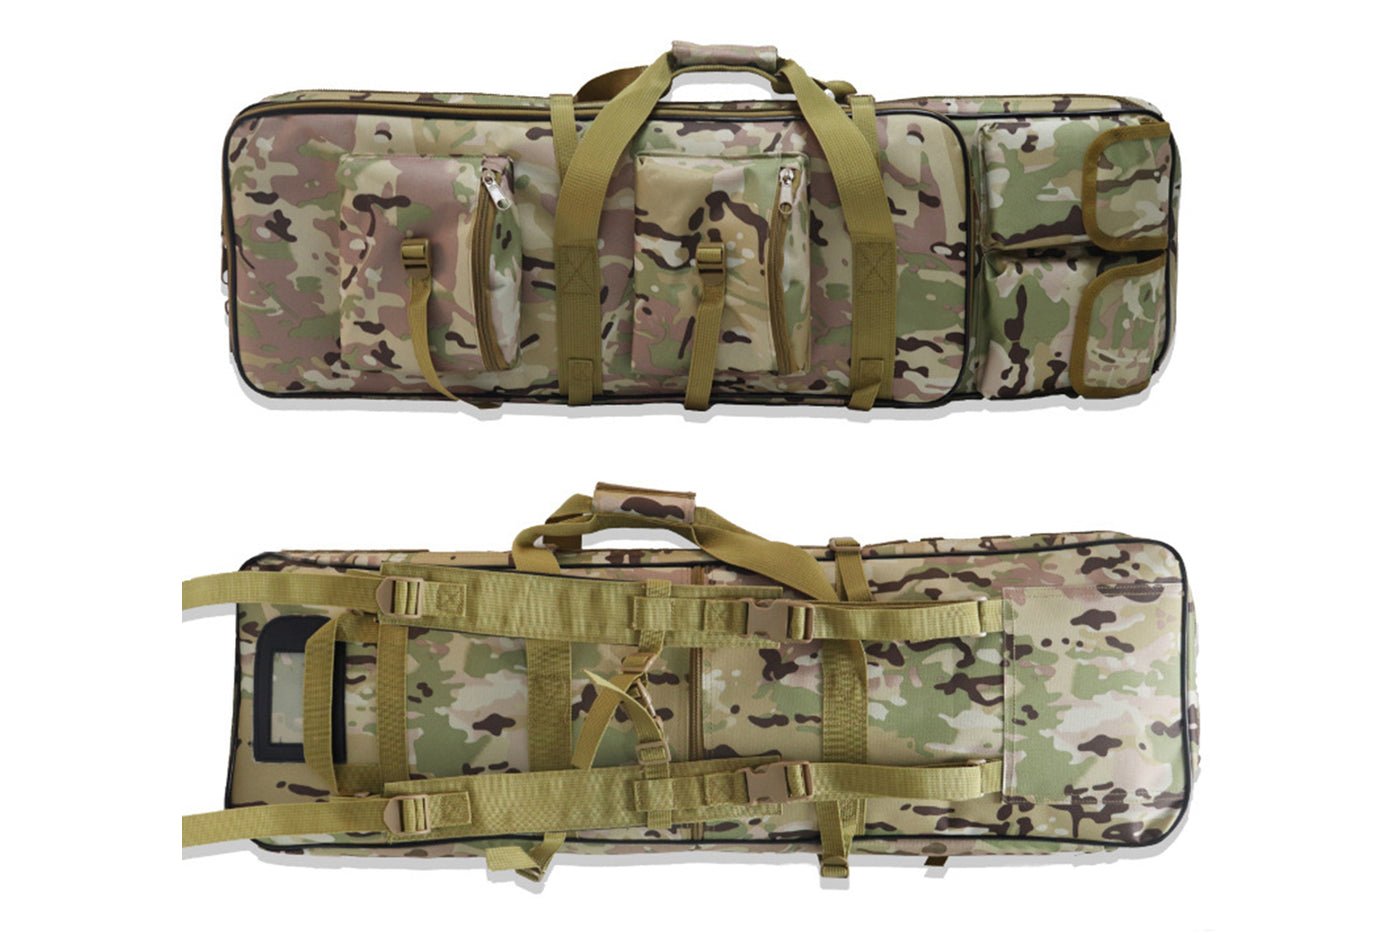 Tactical Long Rifle Case Portable for Firearm Storage, Transportation and Outdoor Hunting